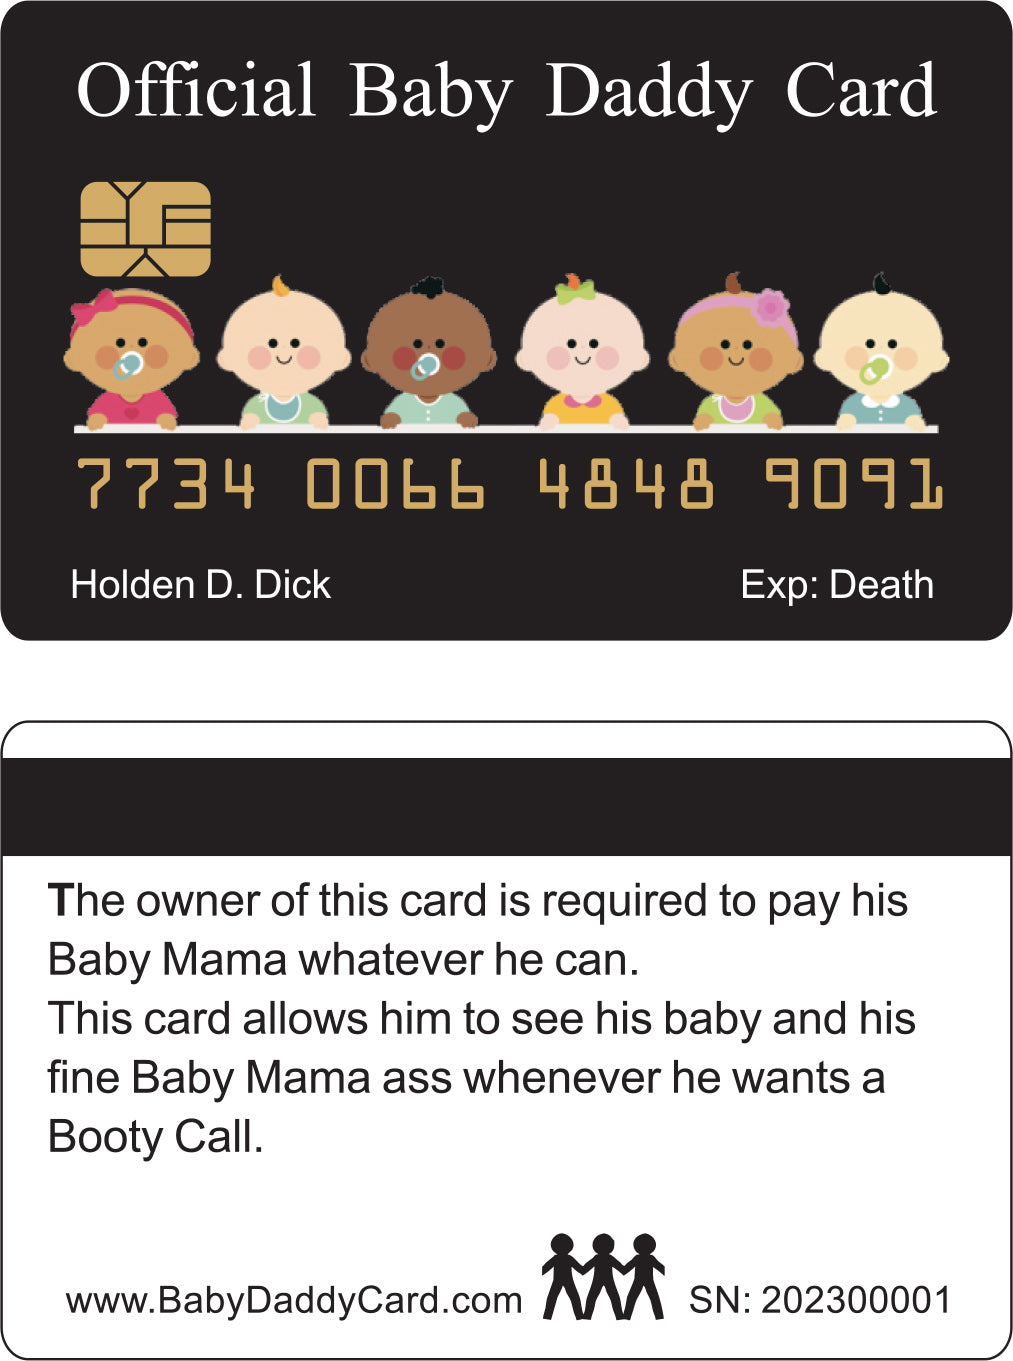 Official Baby Mama Card™ (4 PACK) Free Shipping..